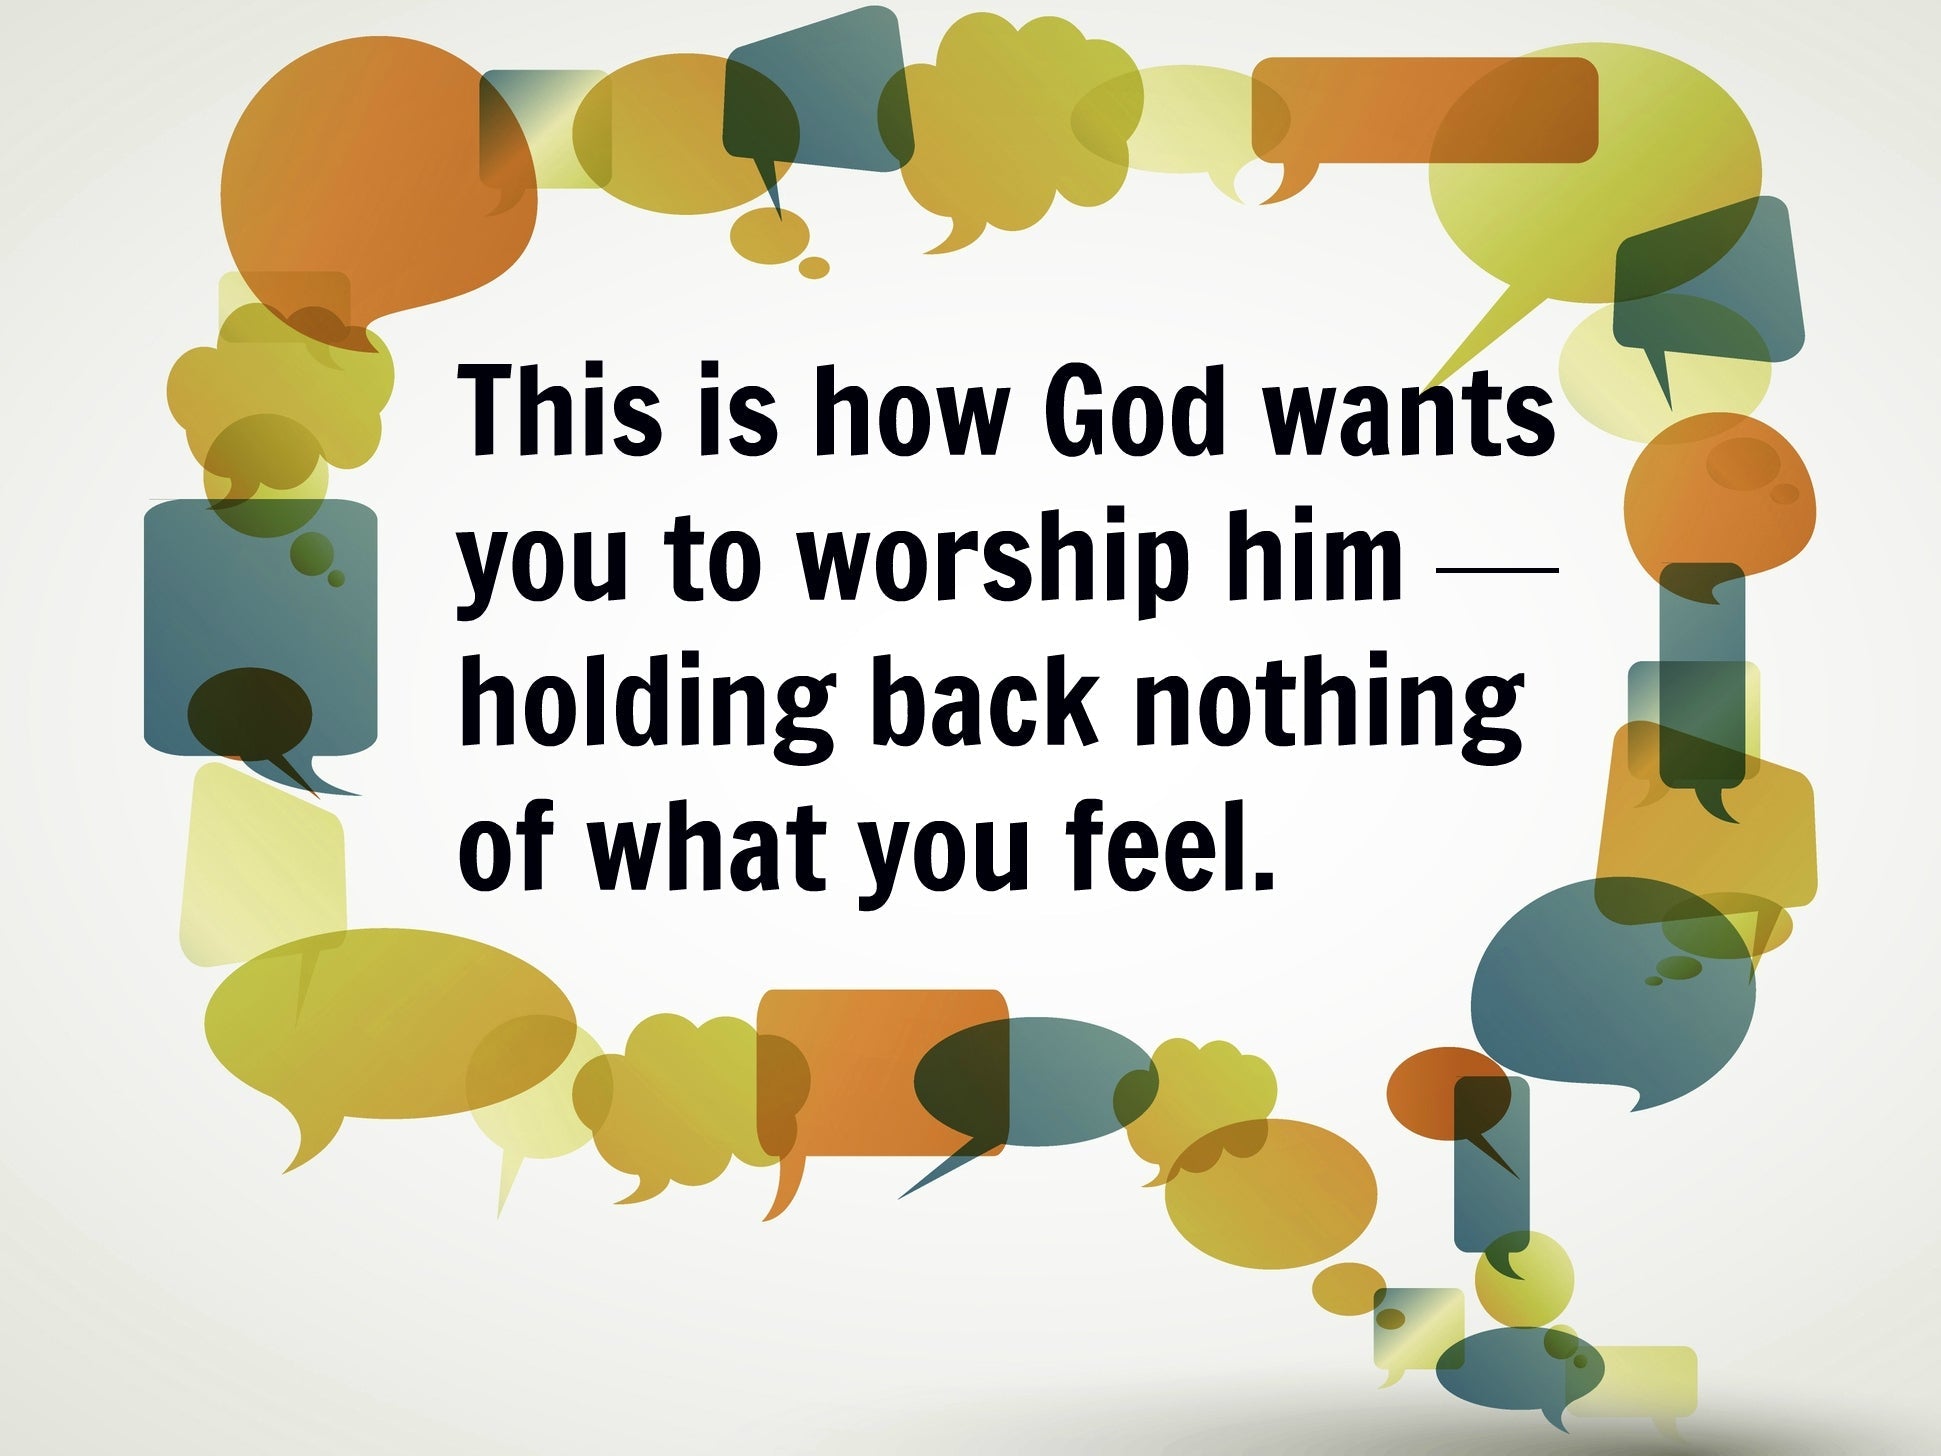 Quote by Rick Warren from The Purpose Driven Life: This is how God wants you to worship him--holding back nothing of what you feel.